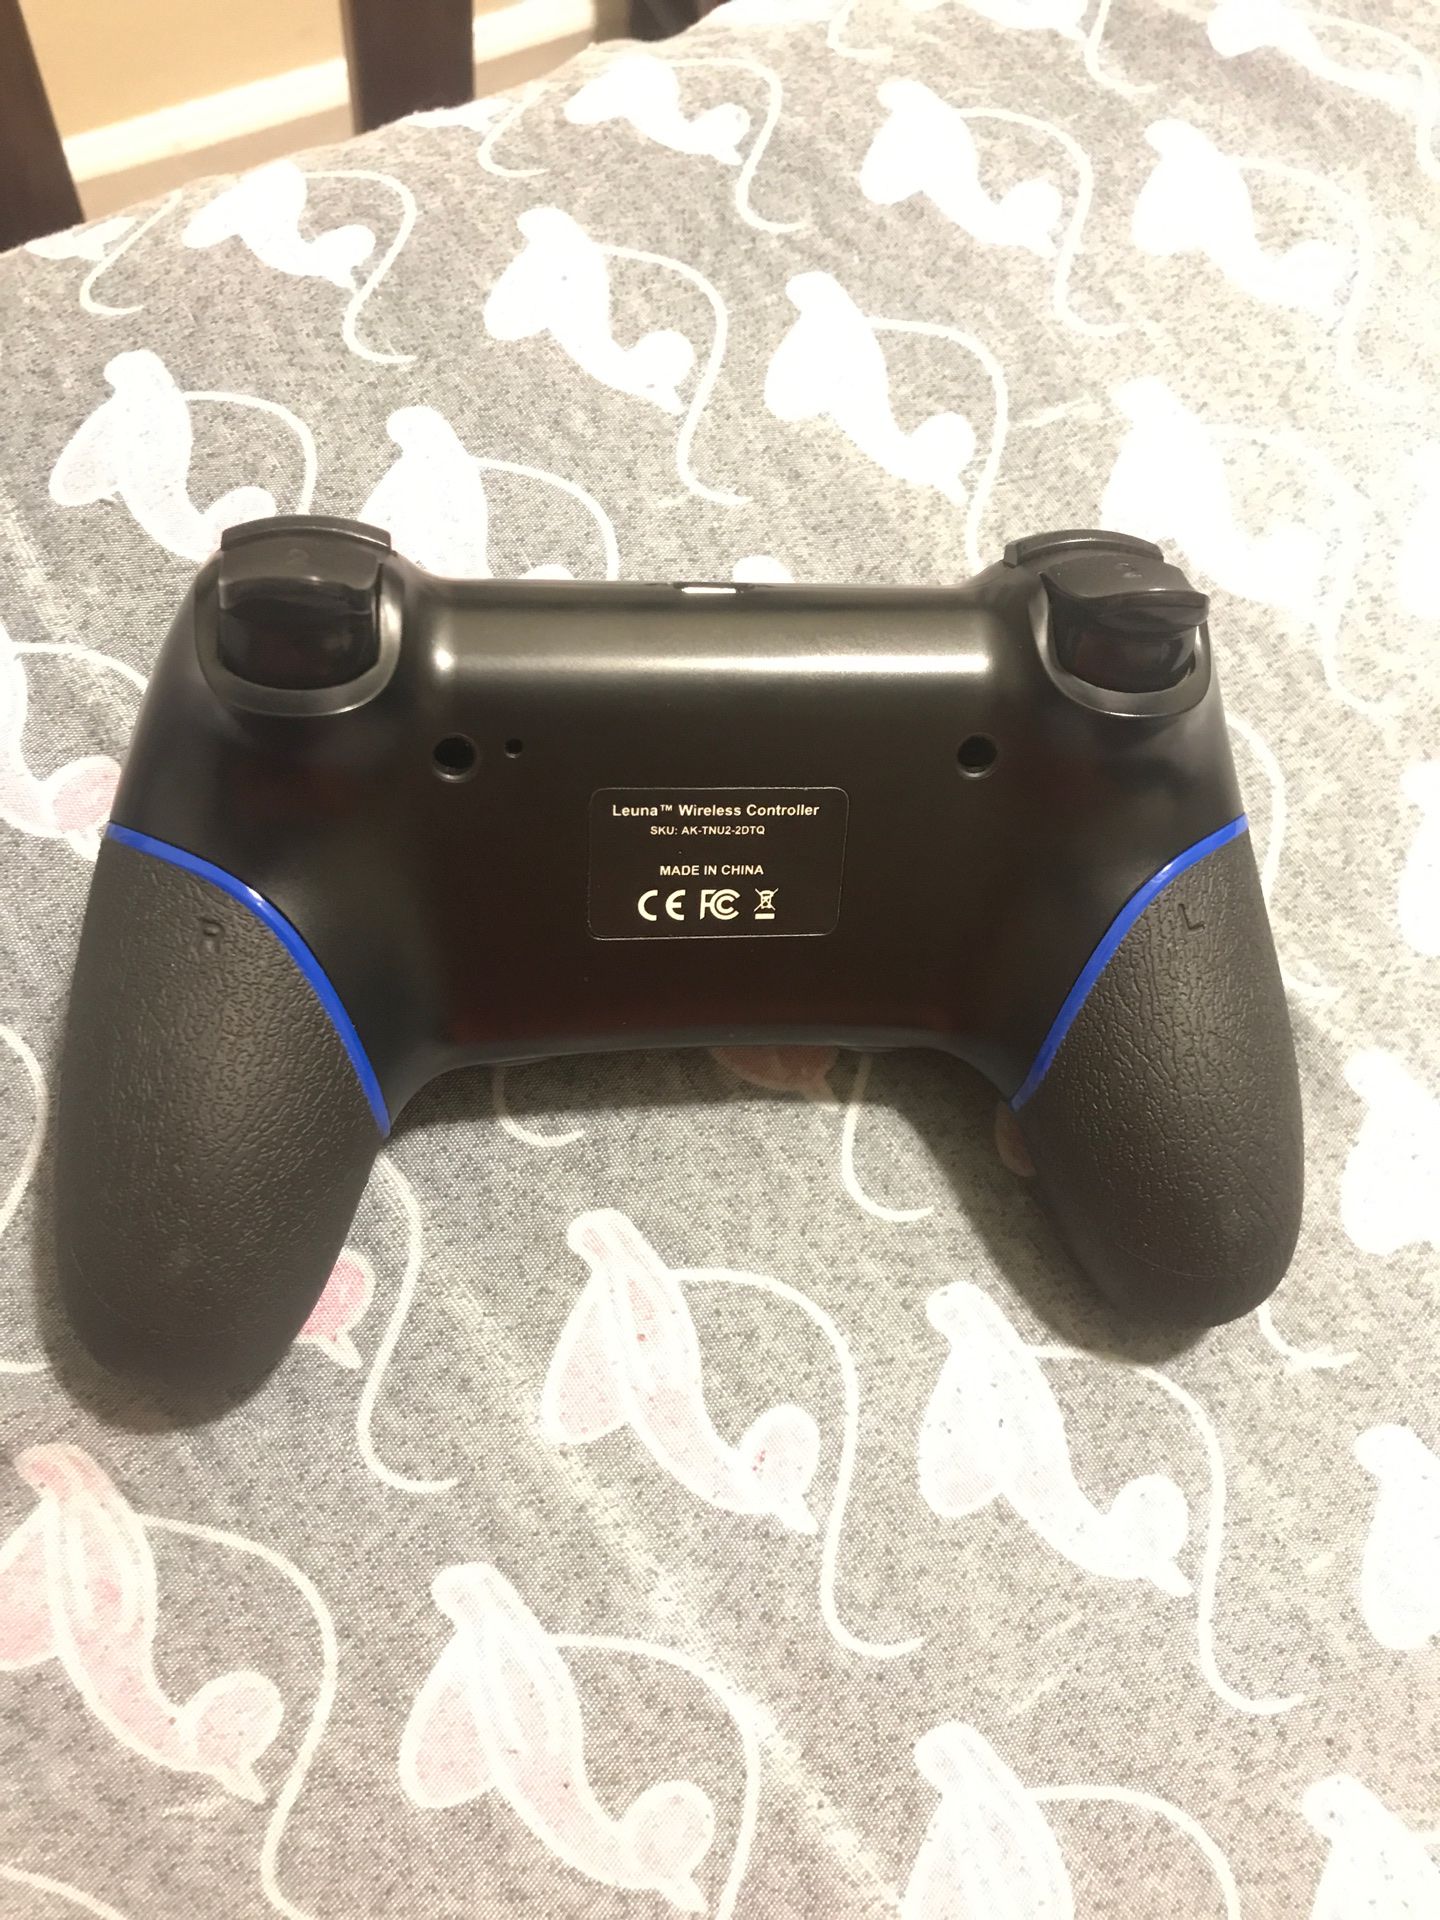 First Generation Ps4 Controller for Sale in Hartford, CT - OfferUp